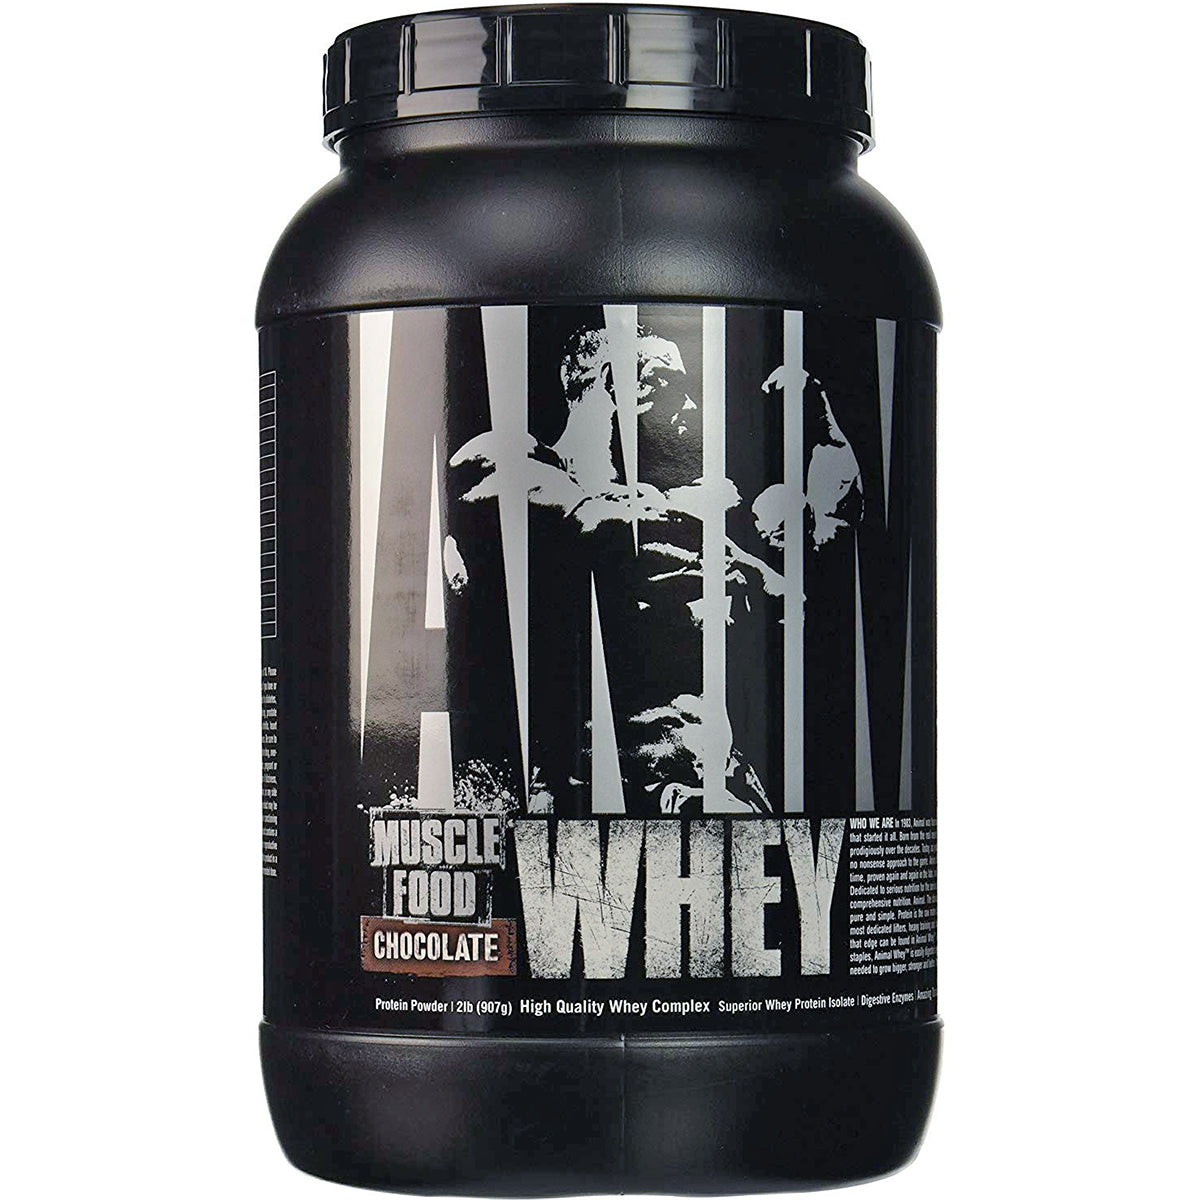 Universal Nutrition Animal Whey - About 27 Servings - Chocolate Universal Nutrition